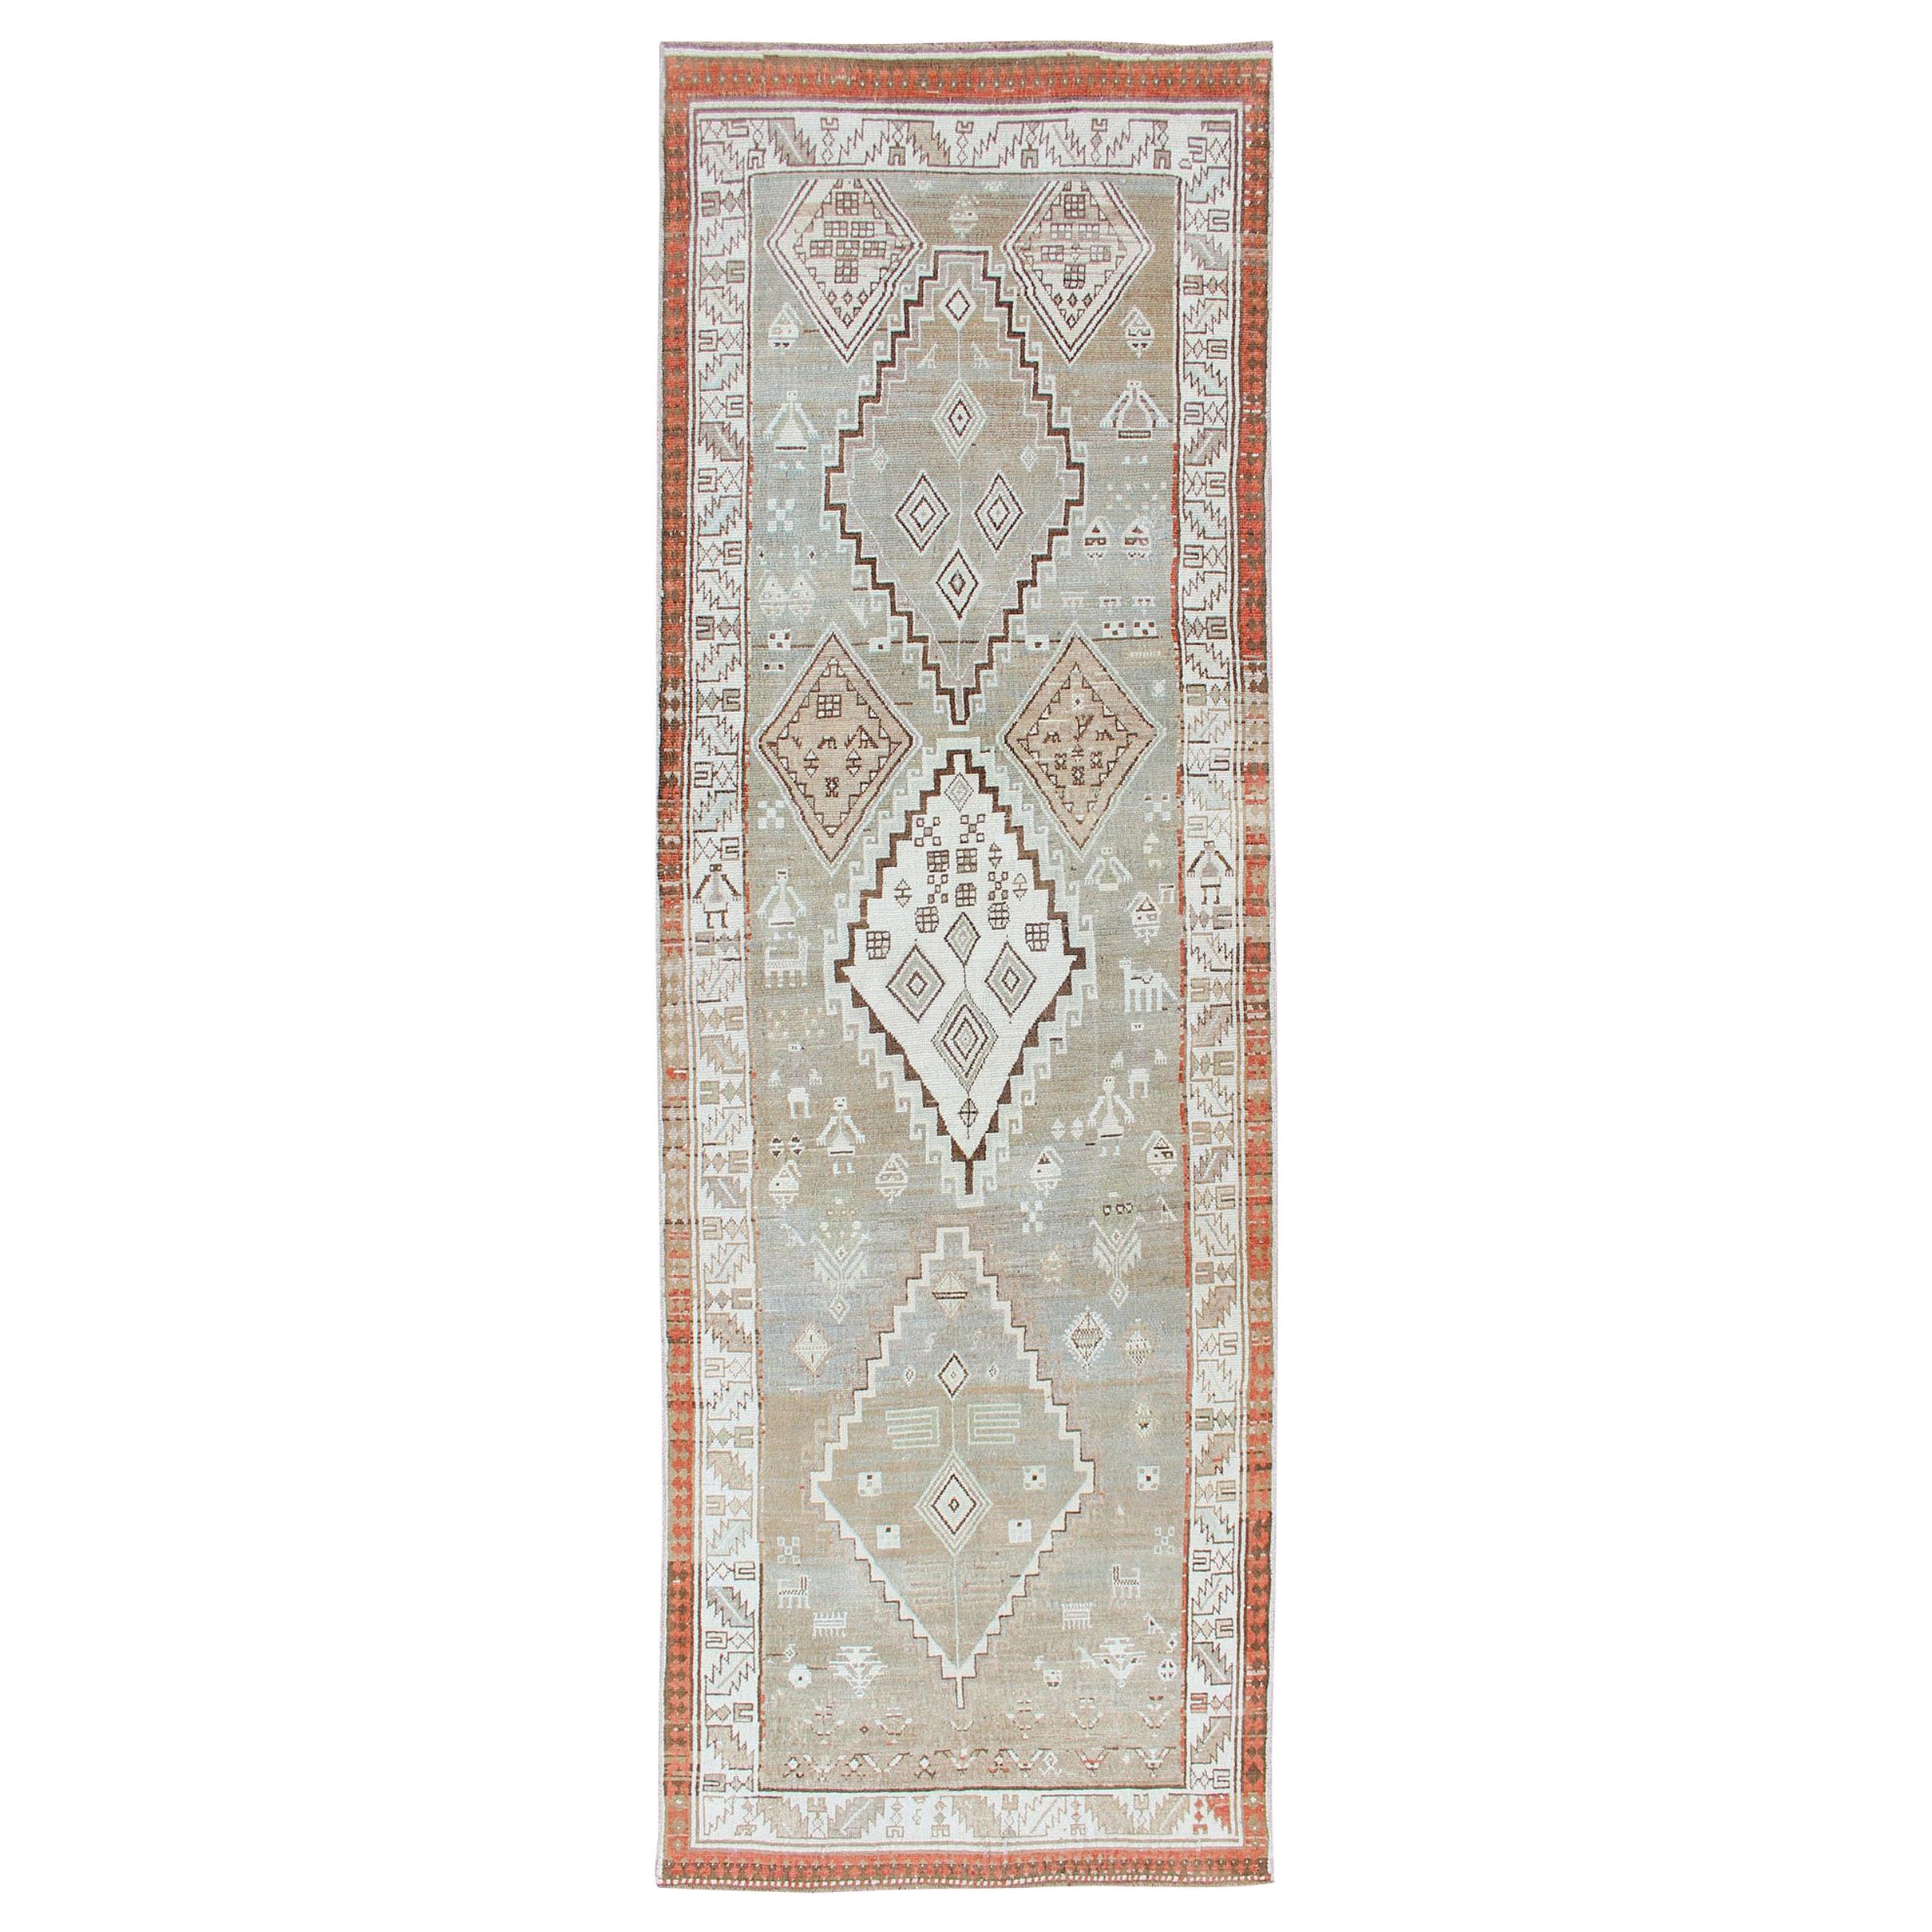 Kurdish Antique Runner with Tribal Design in Light Green, Taupe & Orange-Red For Sale